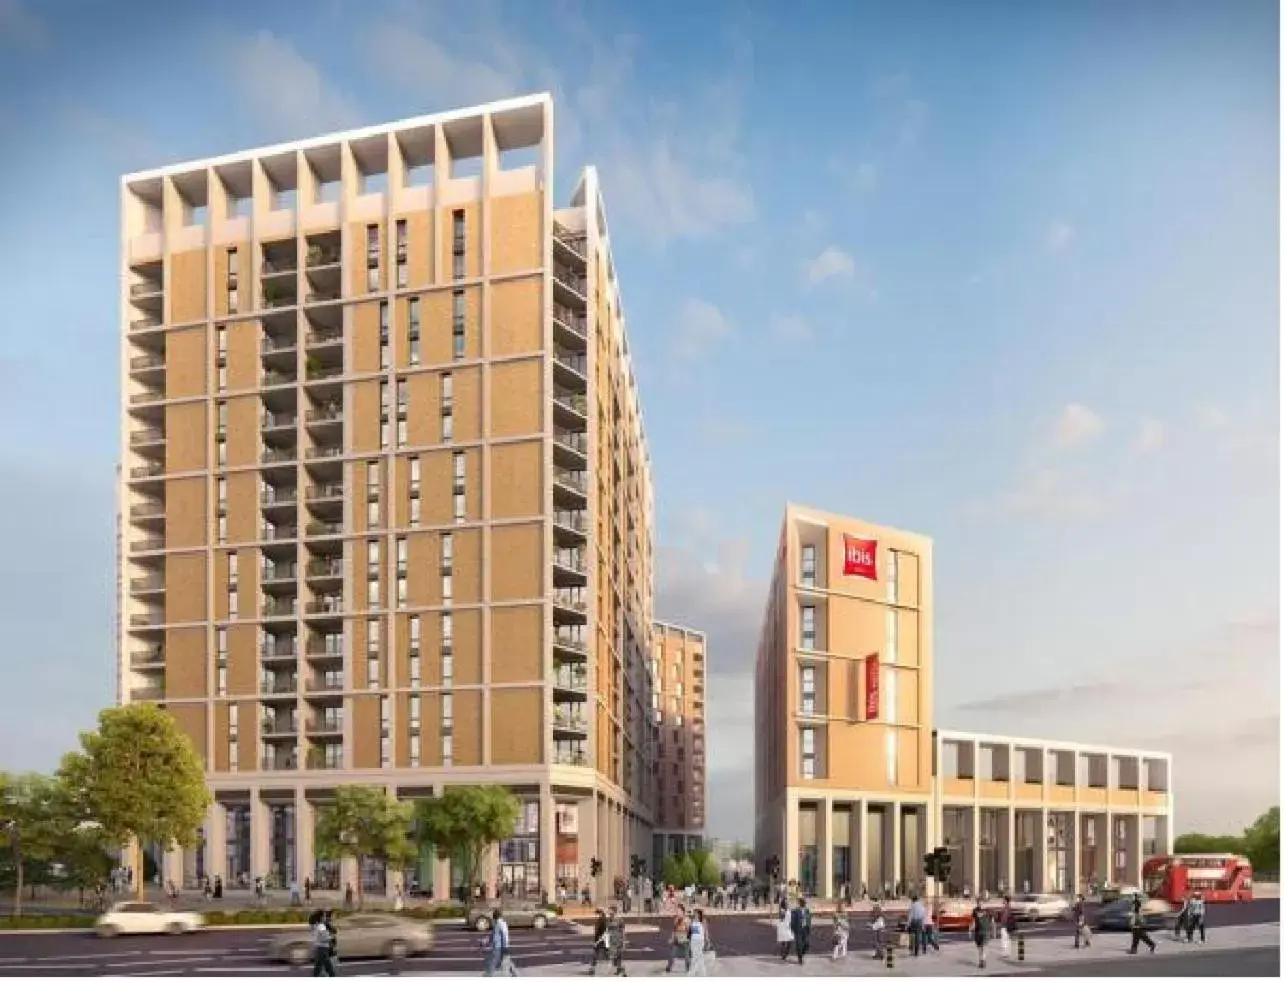 Property Building in ibis London Canning Town